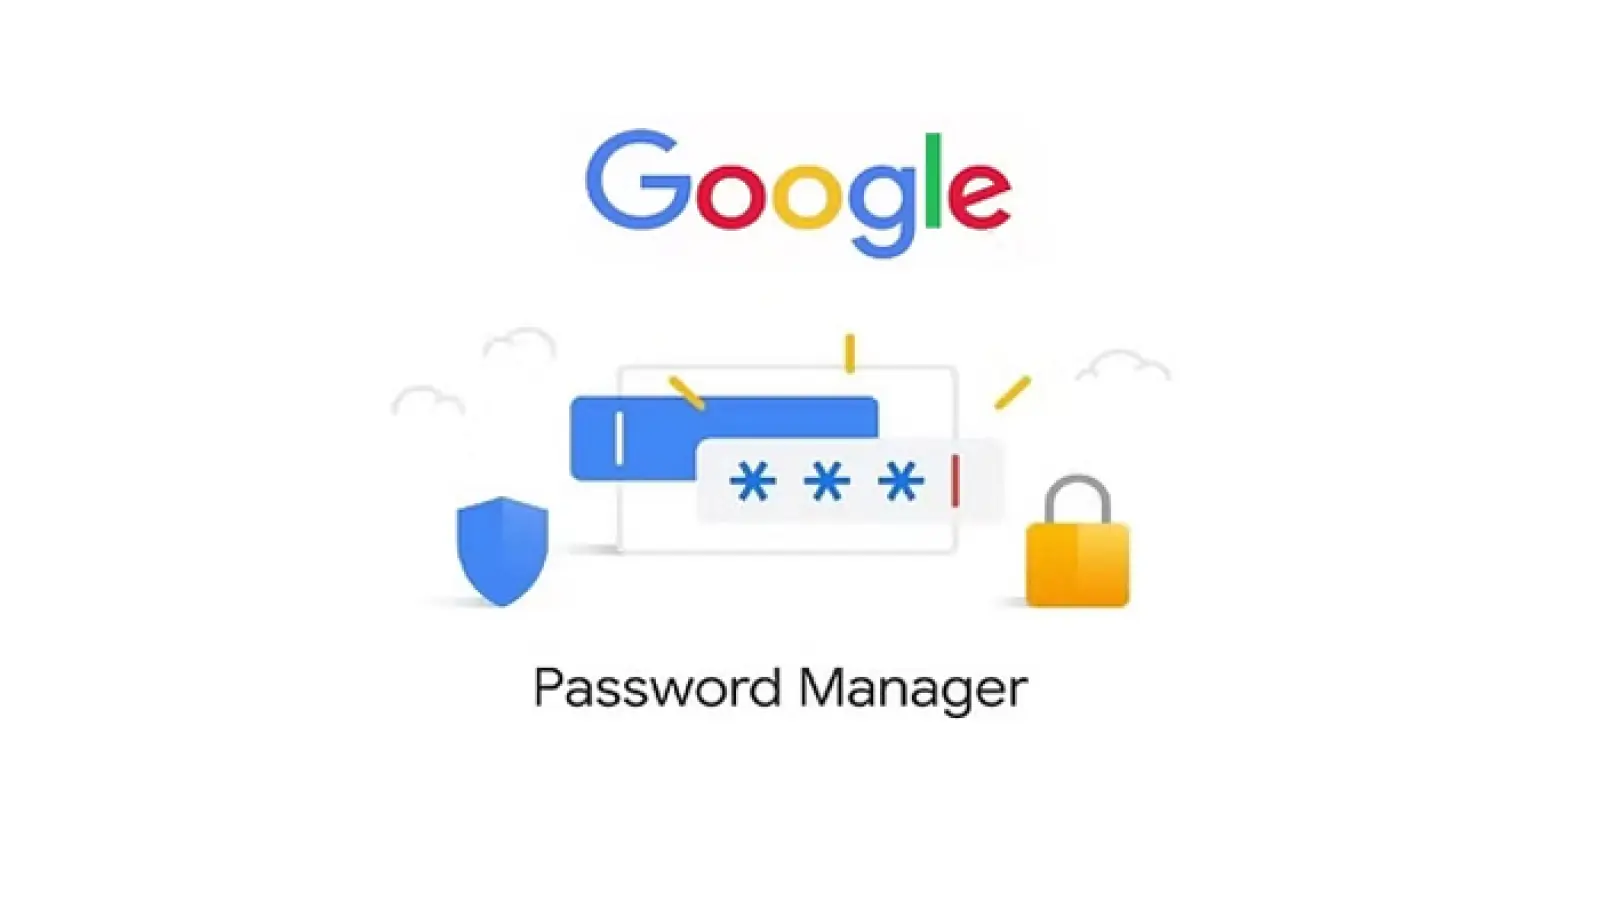 Google released a big update, now you can share passwords with friends and family